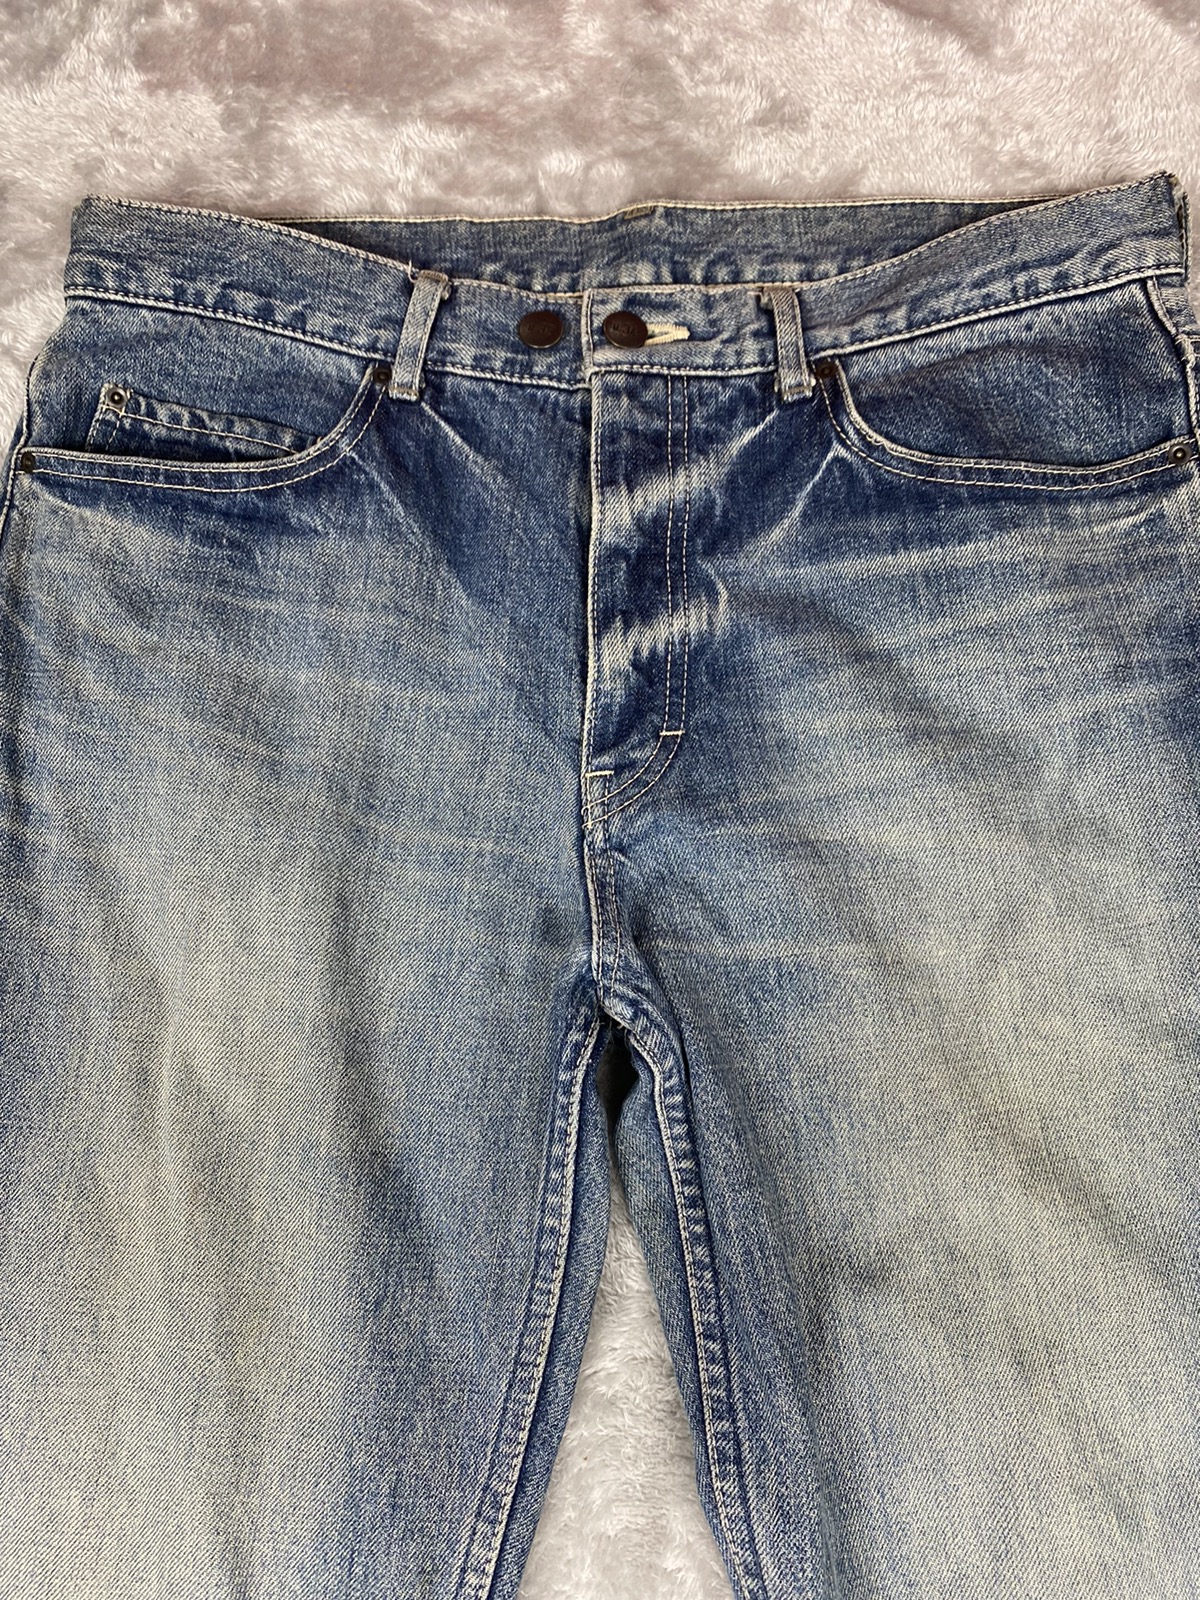 N. Hollywood Denim Faded Jeans. S0208 - 4